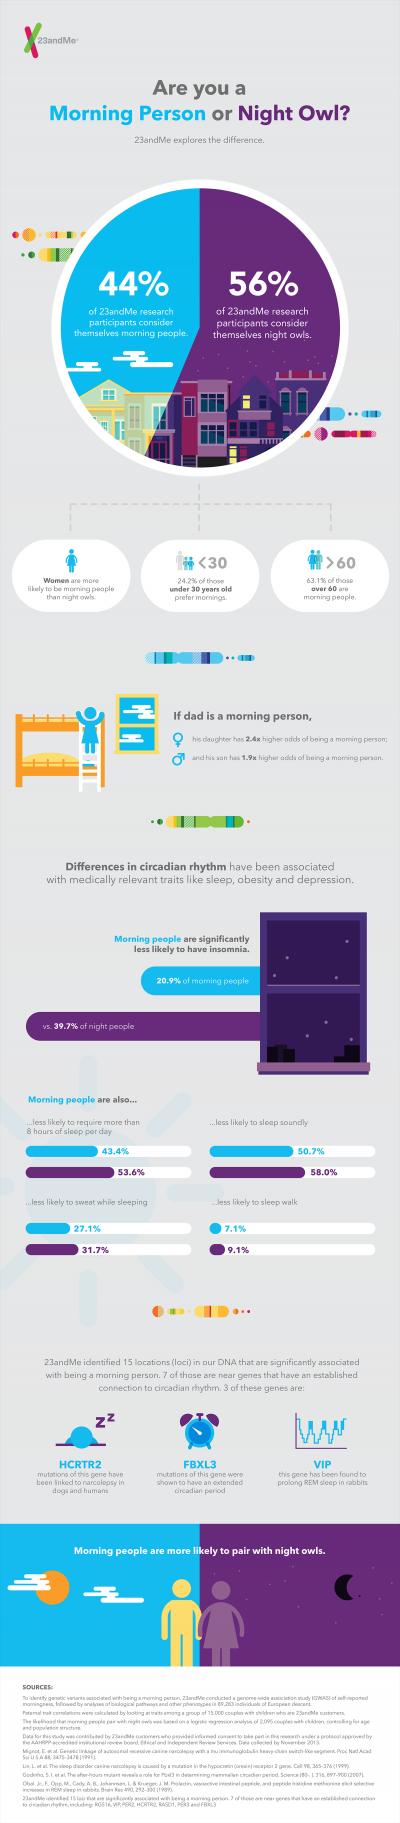 23andMe Morningness Infographic